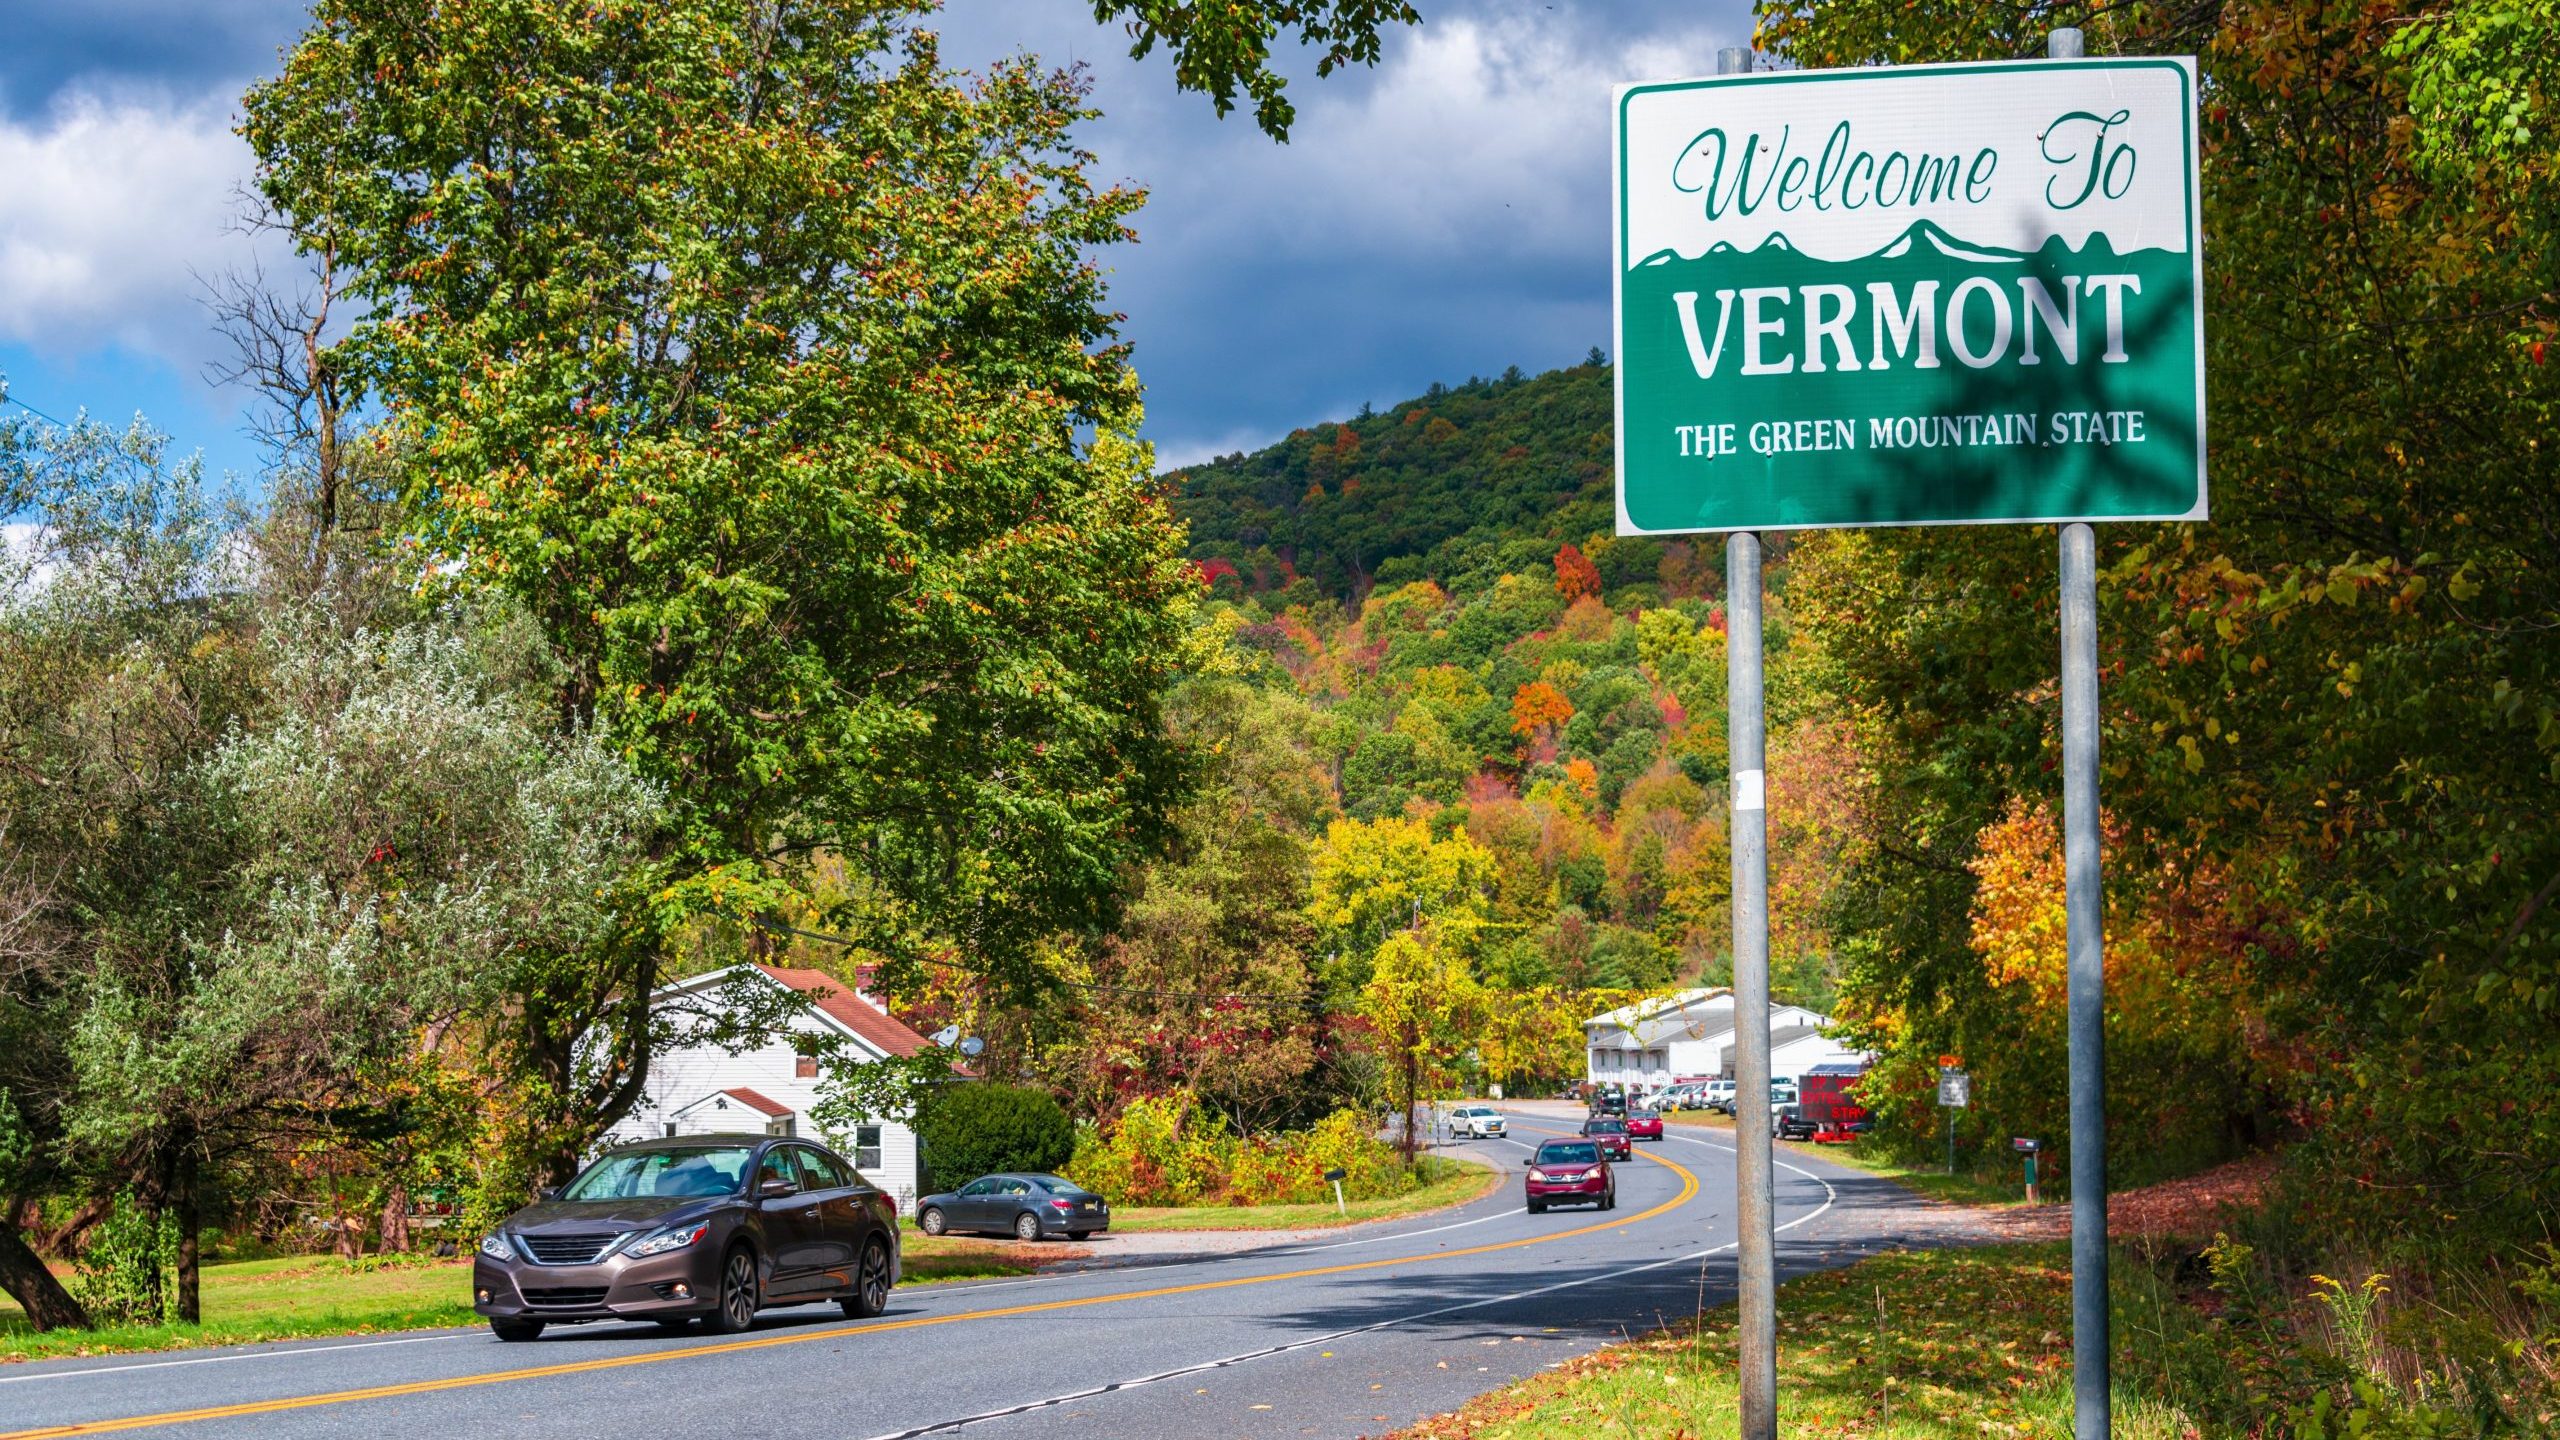 Welcome to Vermont state sign on road